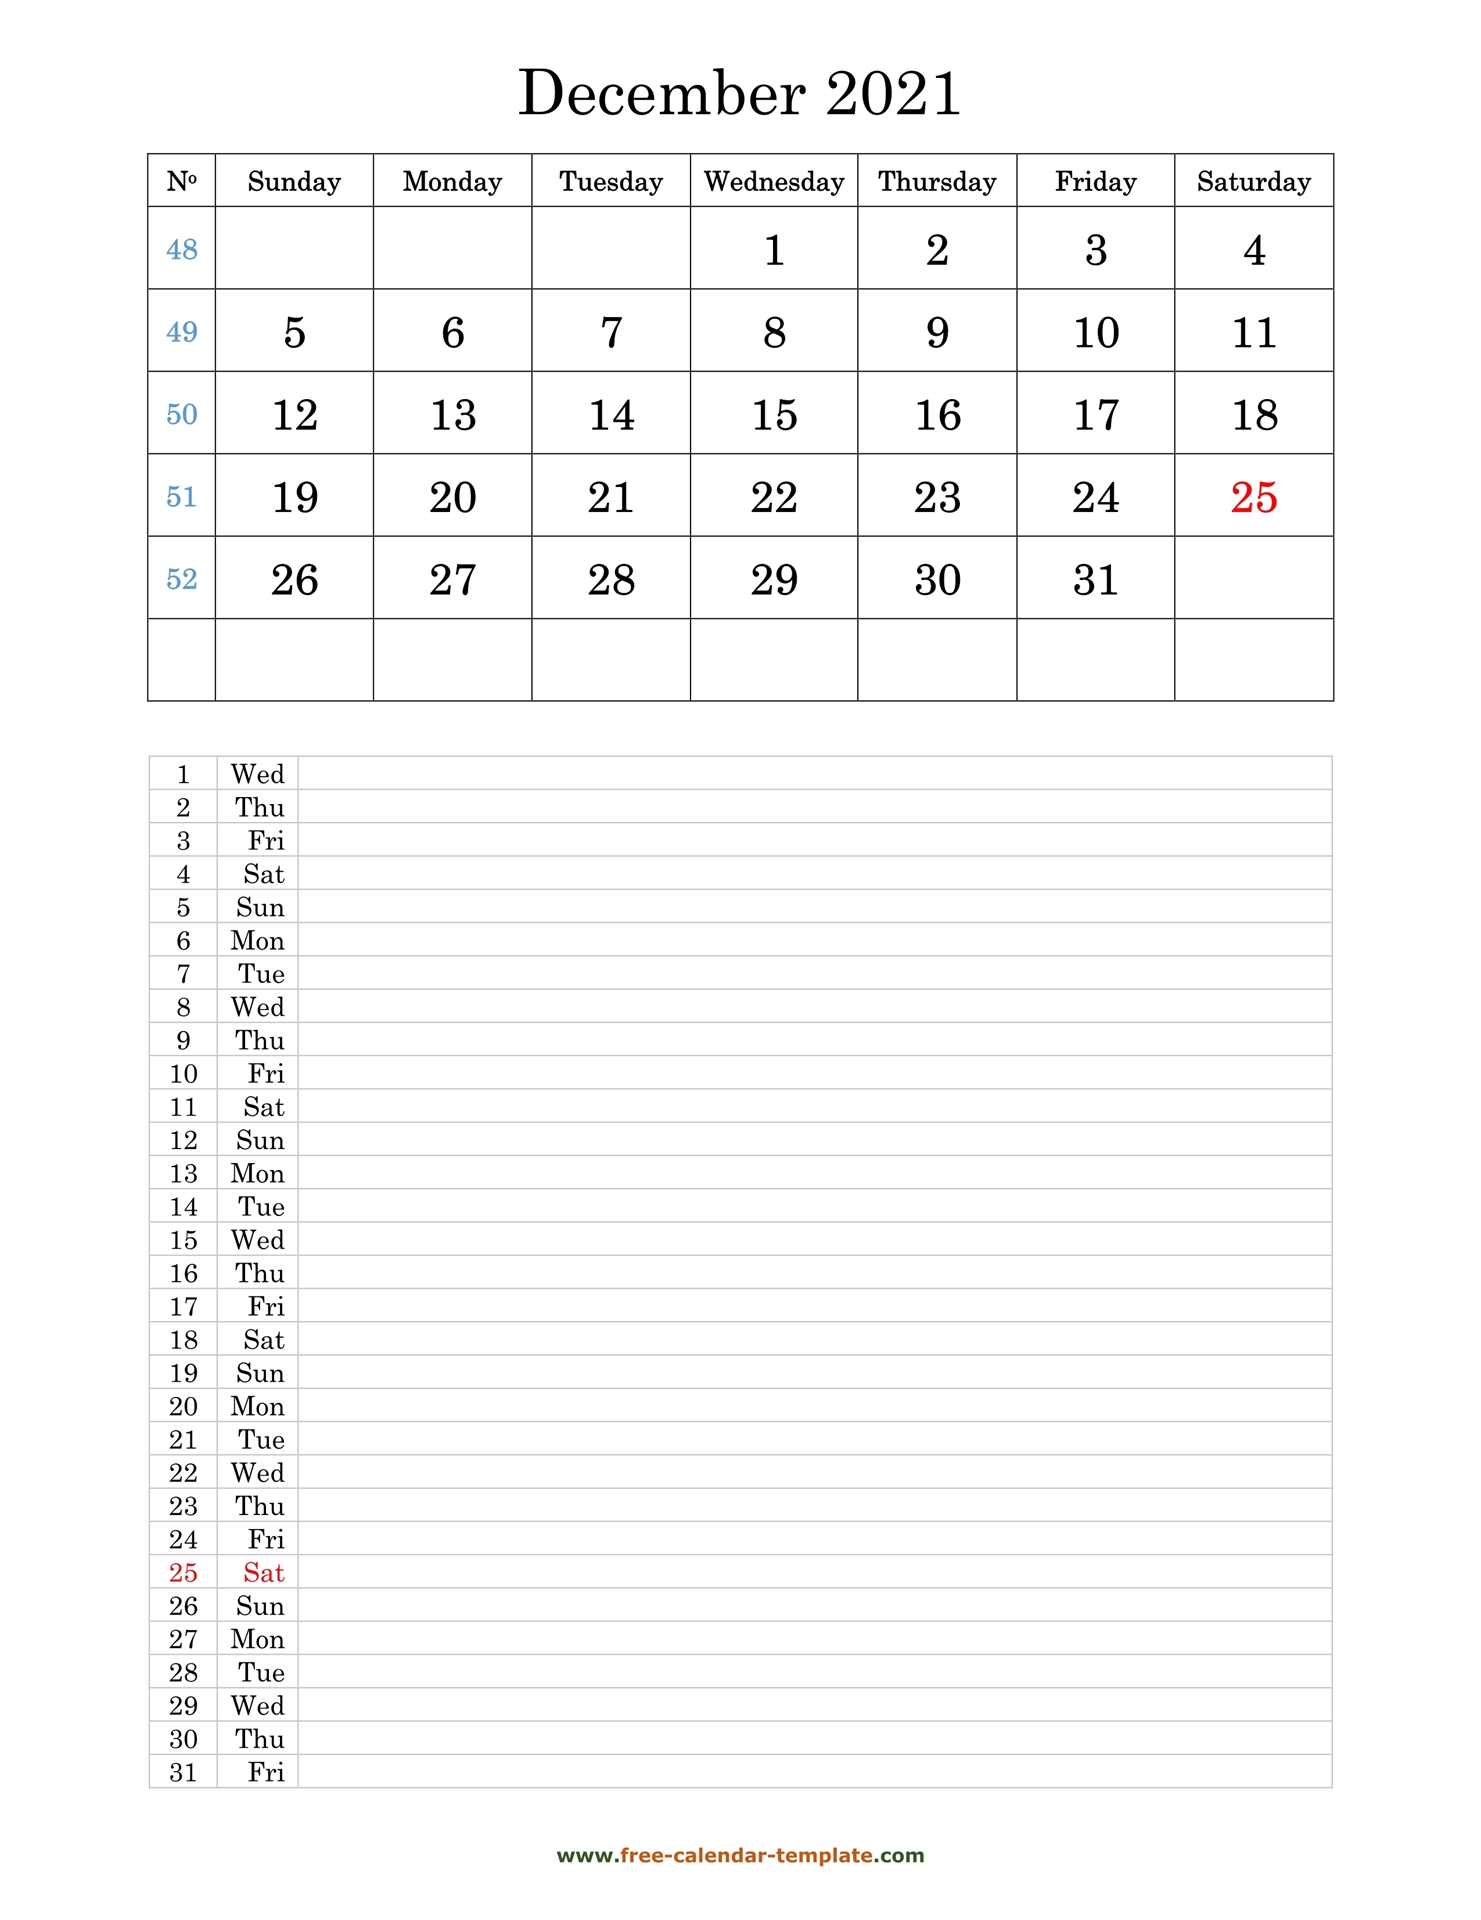 2021 Calendar Monthly Wall Calendar Dual use Ruled Blocks and Side Record Column. Dec Thick Paper Perfect for Organizing & Planning Jan 2021 2021 17x 12.5 Inches 